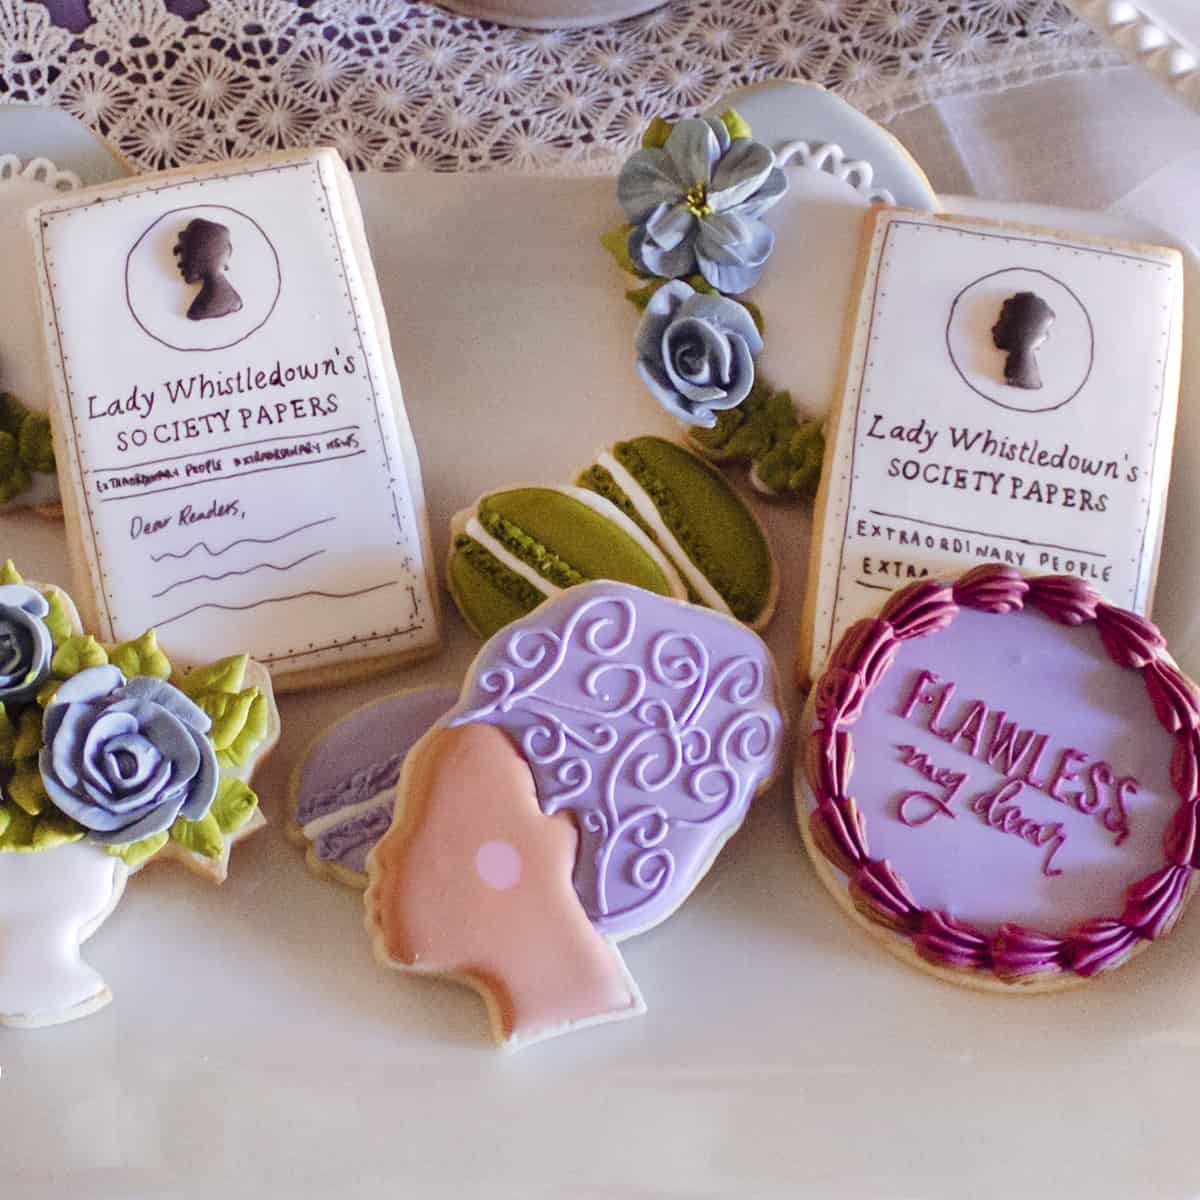 A selection of Bridgerton-inspired royal icing biscuits